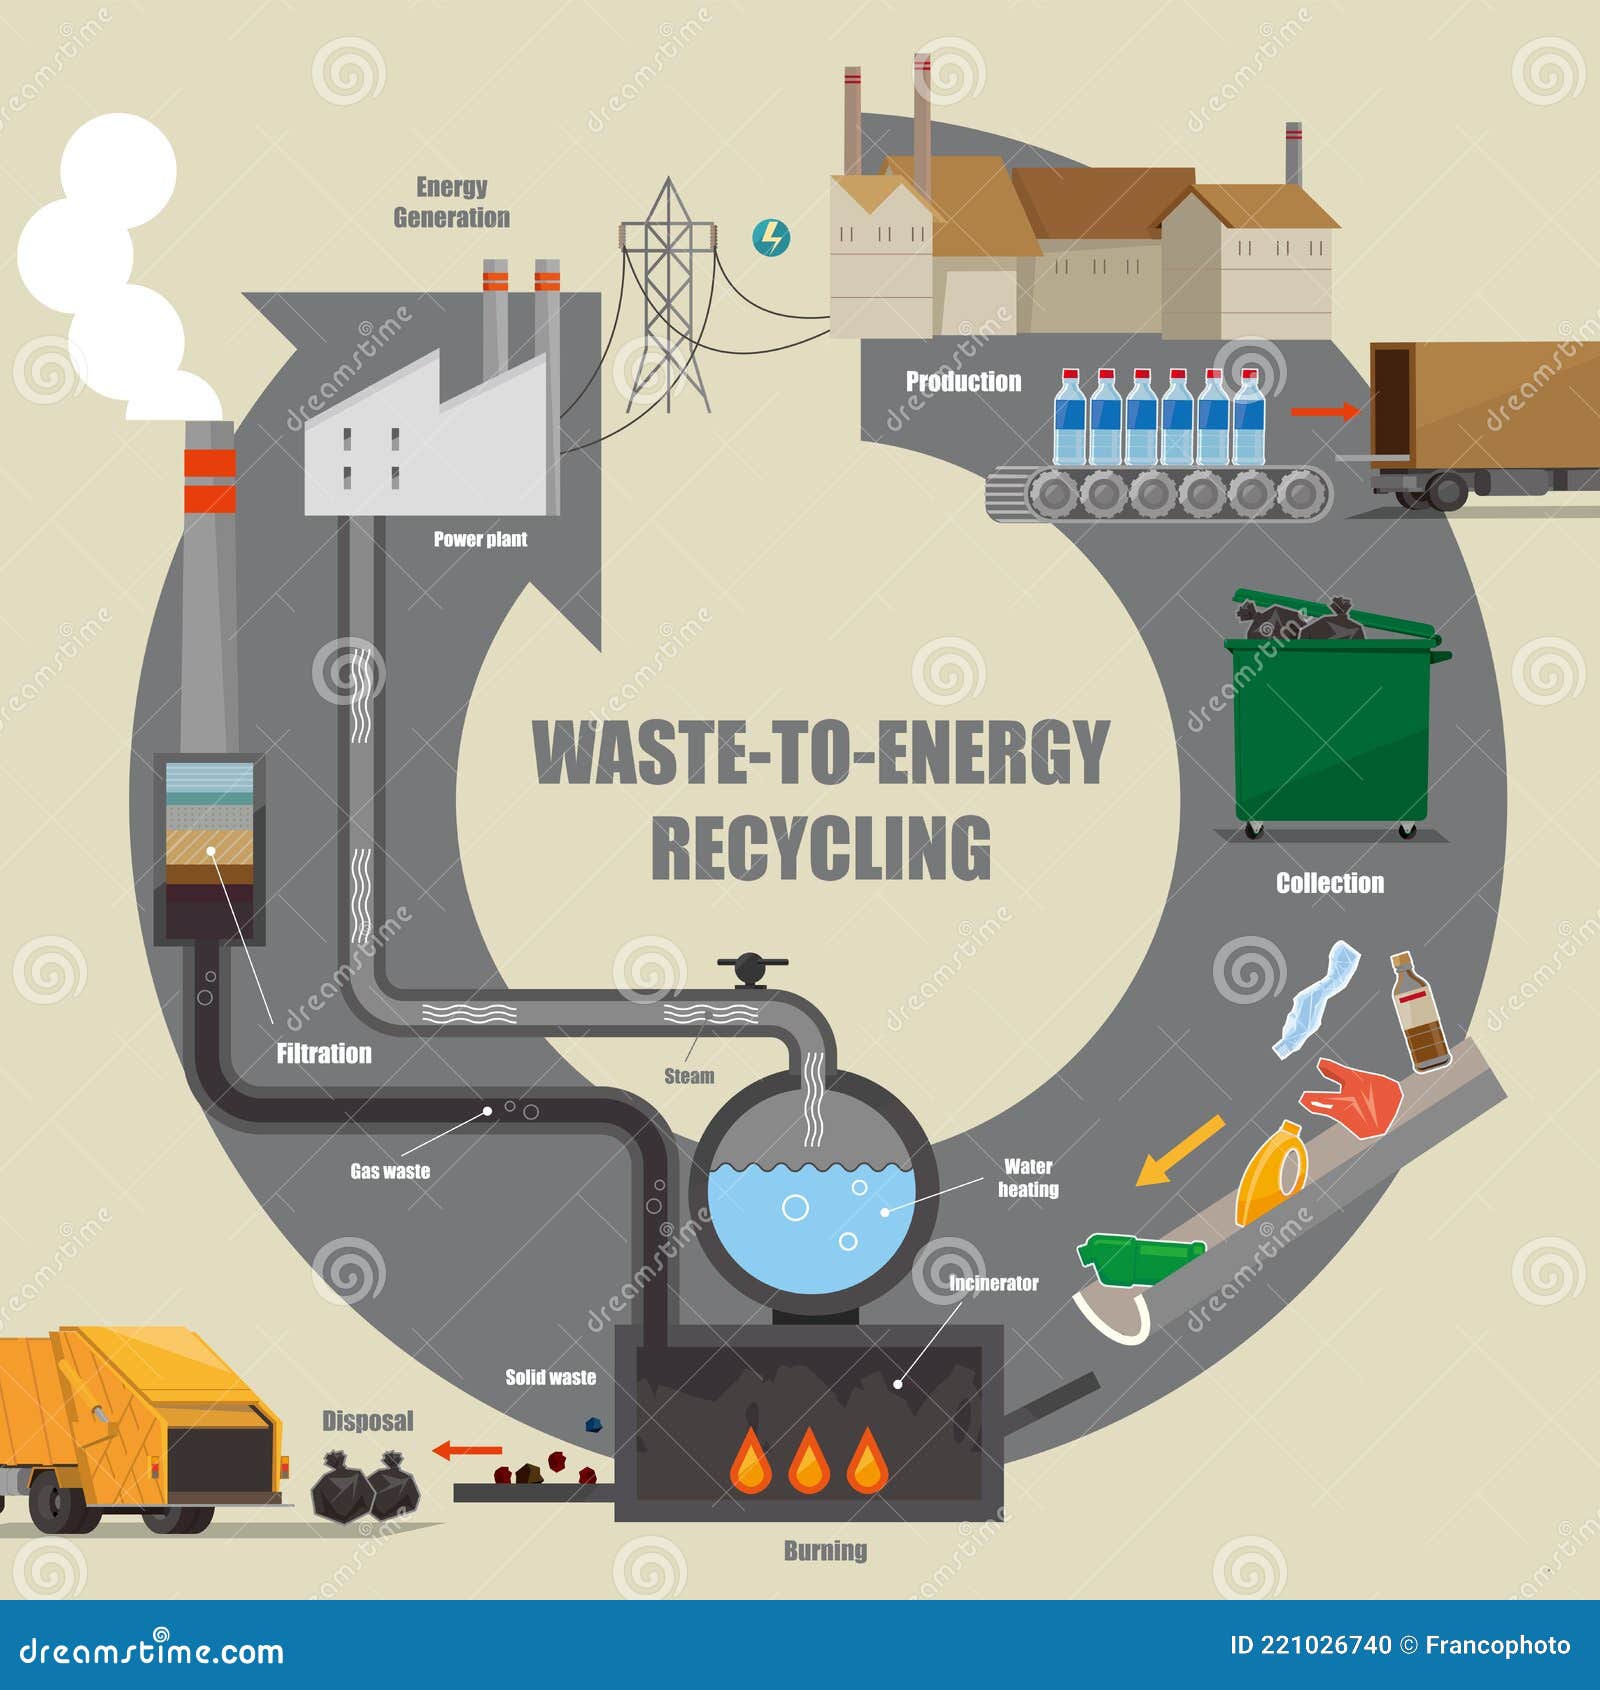 illustrative-diagram-of-waste-to-energy-recycling-process-stock-vector